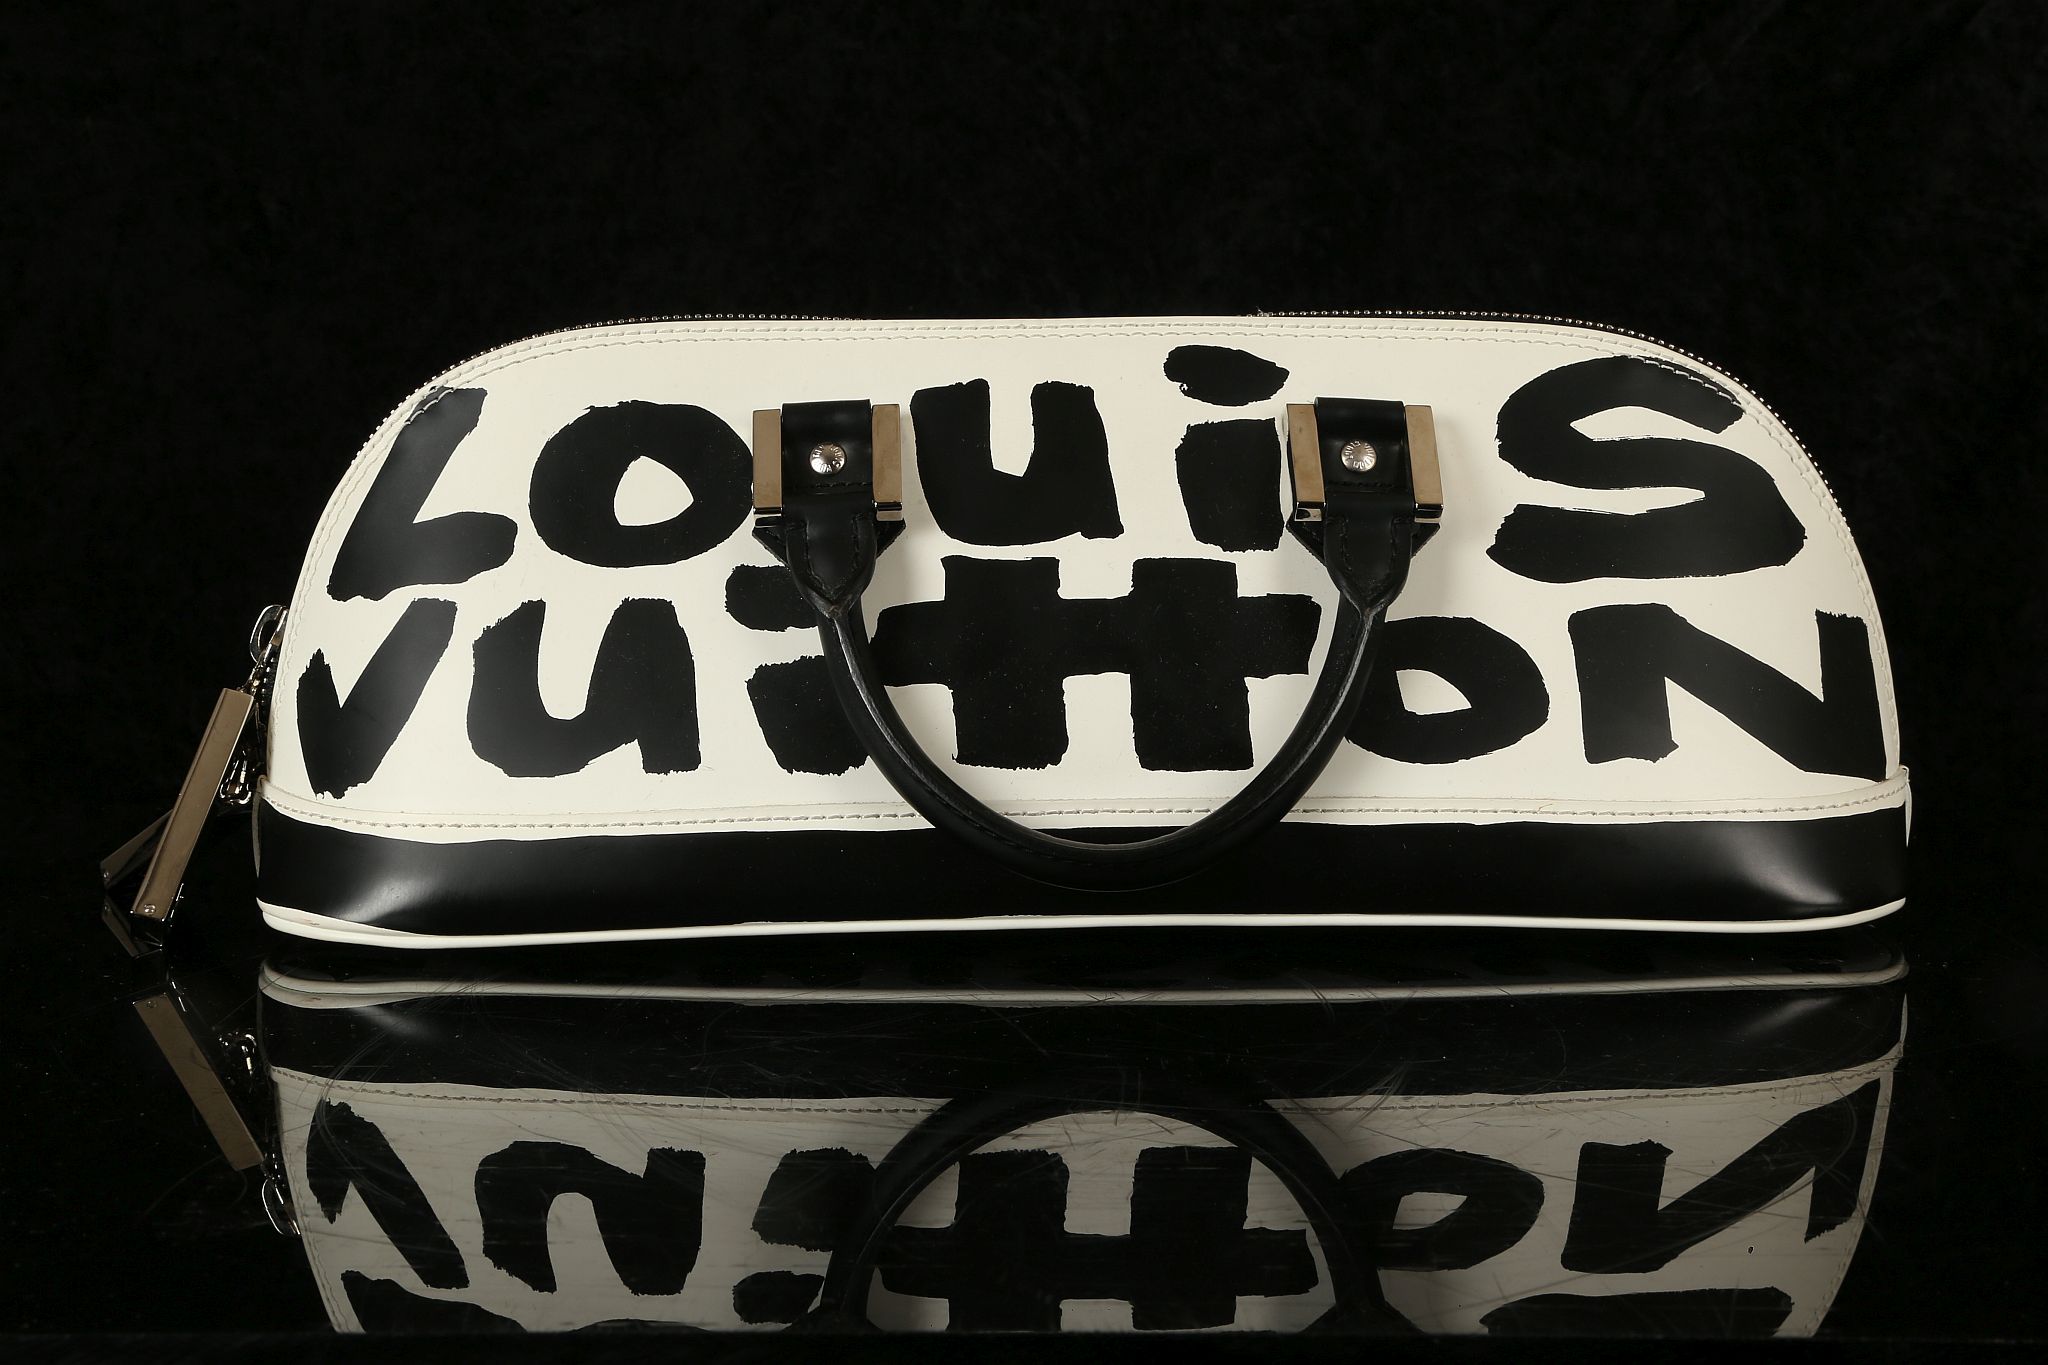 LOUIS VUITTON STEPHEN SPROUSE EAST/WEST ALMA BAG, date code for 2001, black and white graffiti - Image 7 of 14